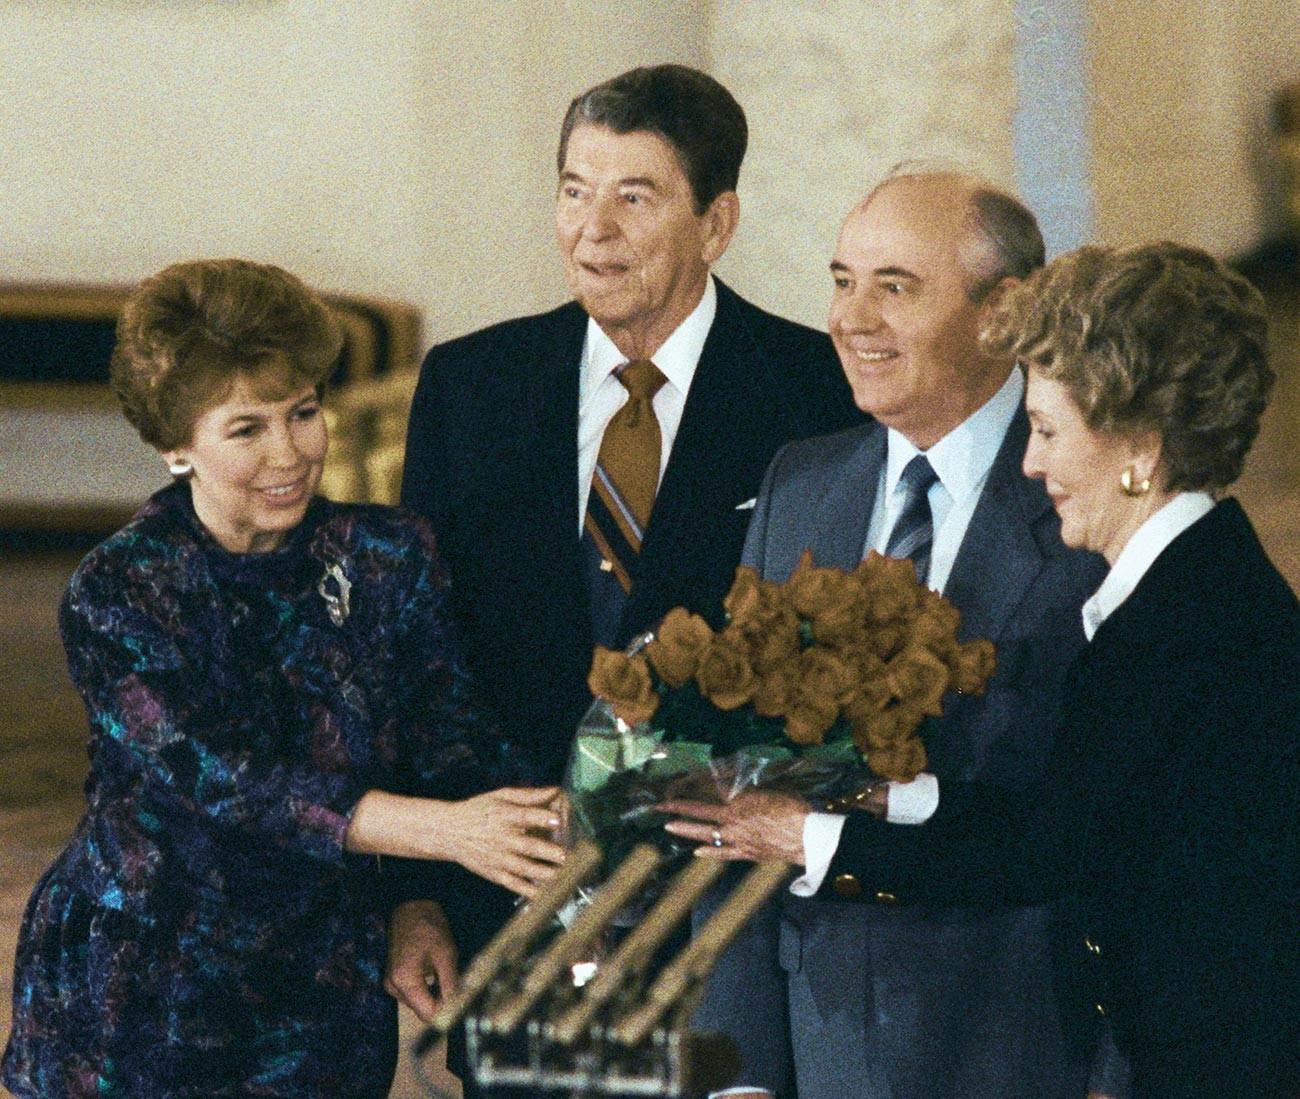 General Secretary of the Central Committee of the CPSU Mikhail Gorbachev (second from right) and the US President Ronald Reagan (center) with their spouses at a meeting in the Kremlin during the visit of R. Reagan in the USSR in 1988